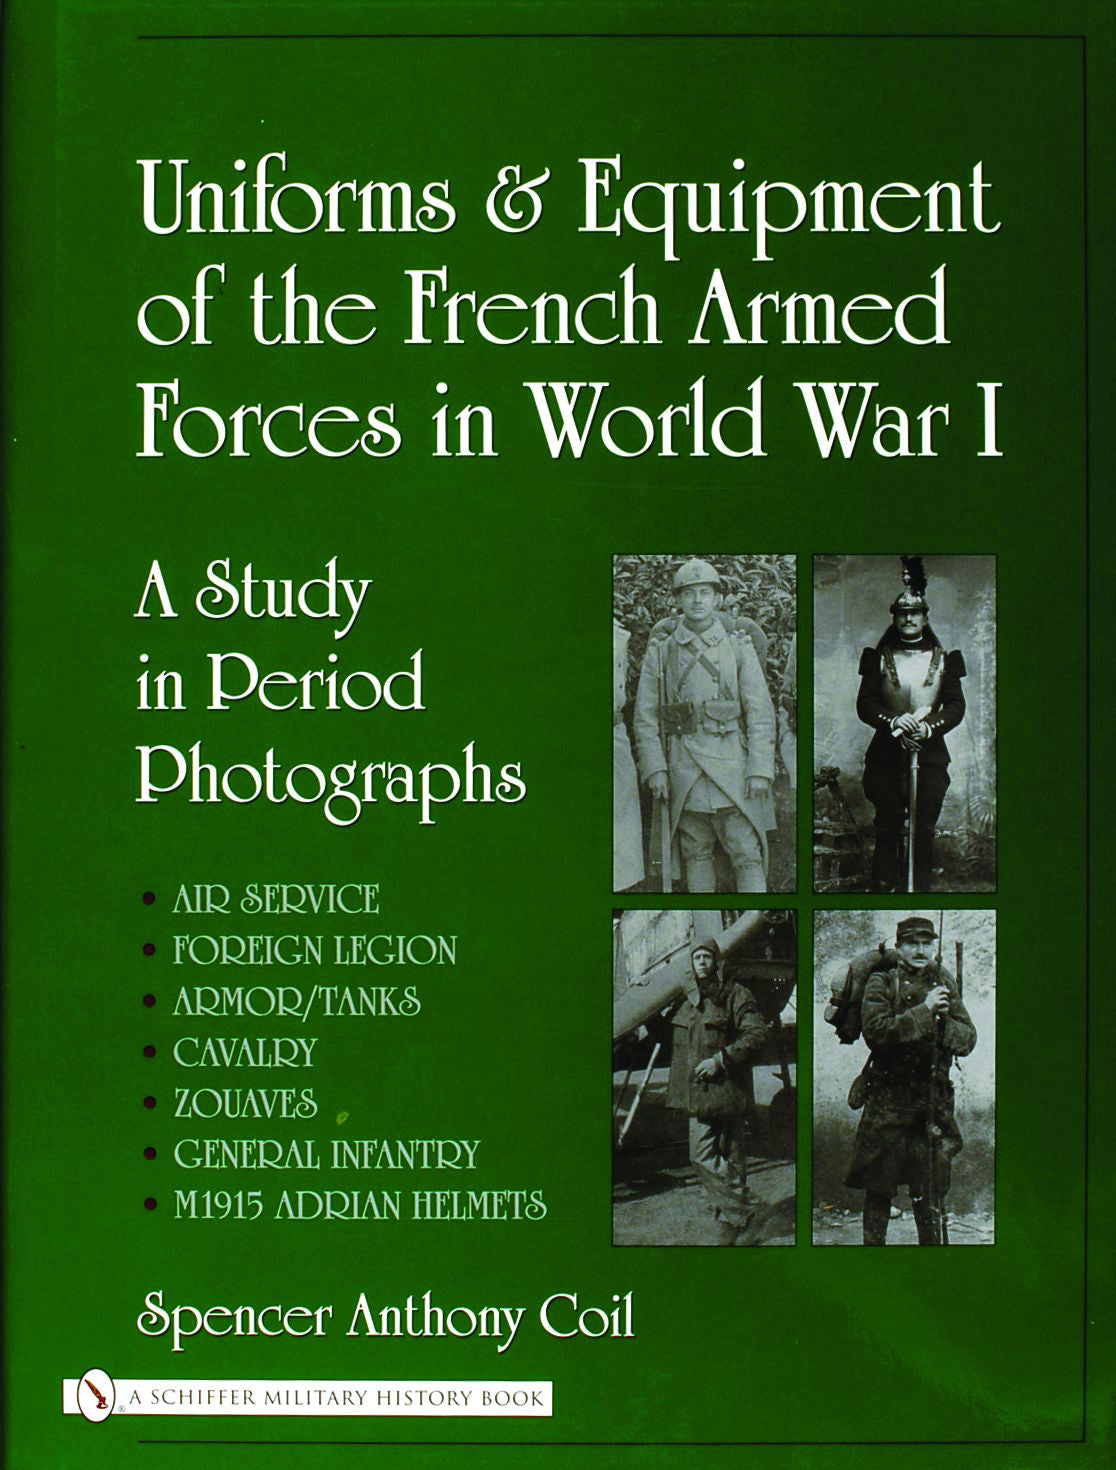 Uniforms and Equipment of the French Armed Forces in World War I